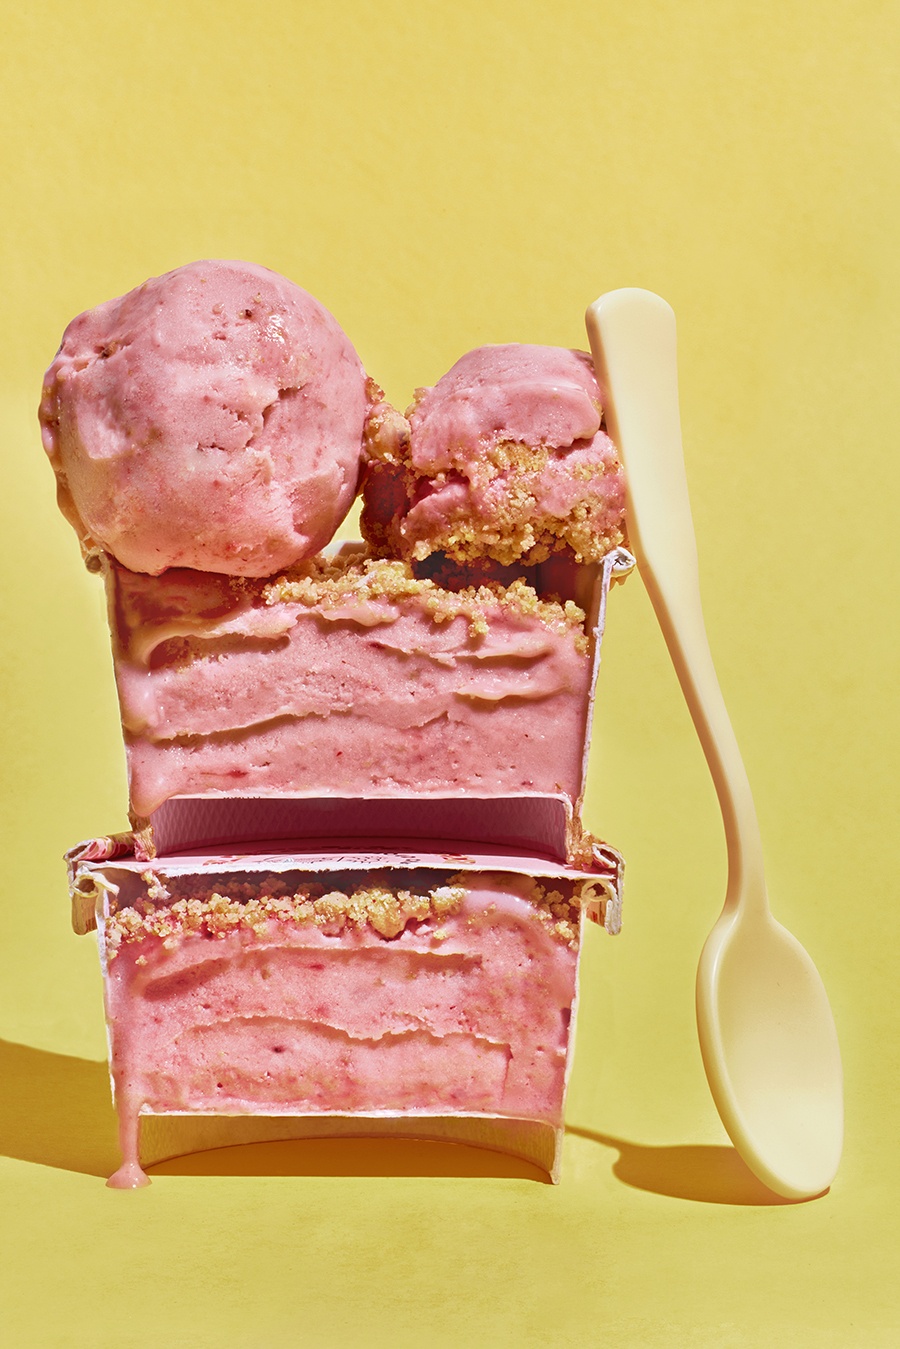 A small container of strawberry ice cream with a crumbly topping is cut in half, with one half stacked on top of the other, displaying the contents.